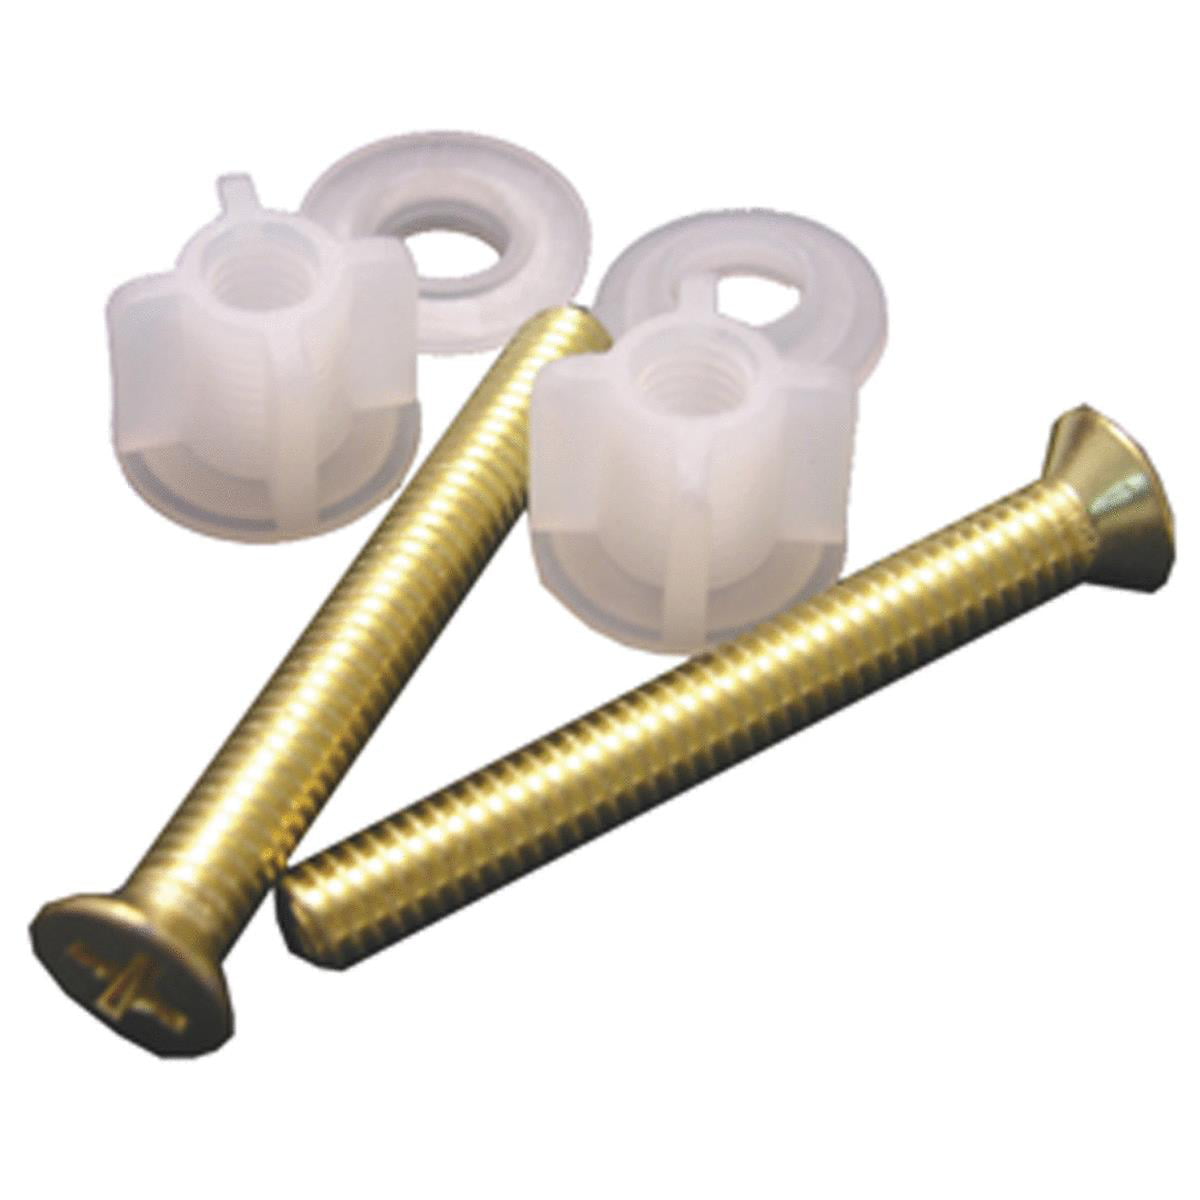 LASCO 04-3647 Solid Brass Snap Off 1//4-Inch by 2-1//4-Inch with Nuts and Washers Toilet Bolts